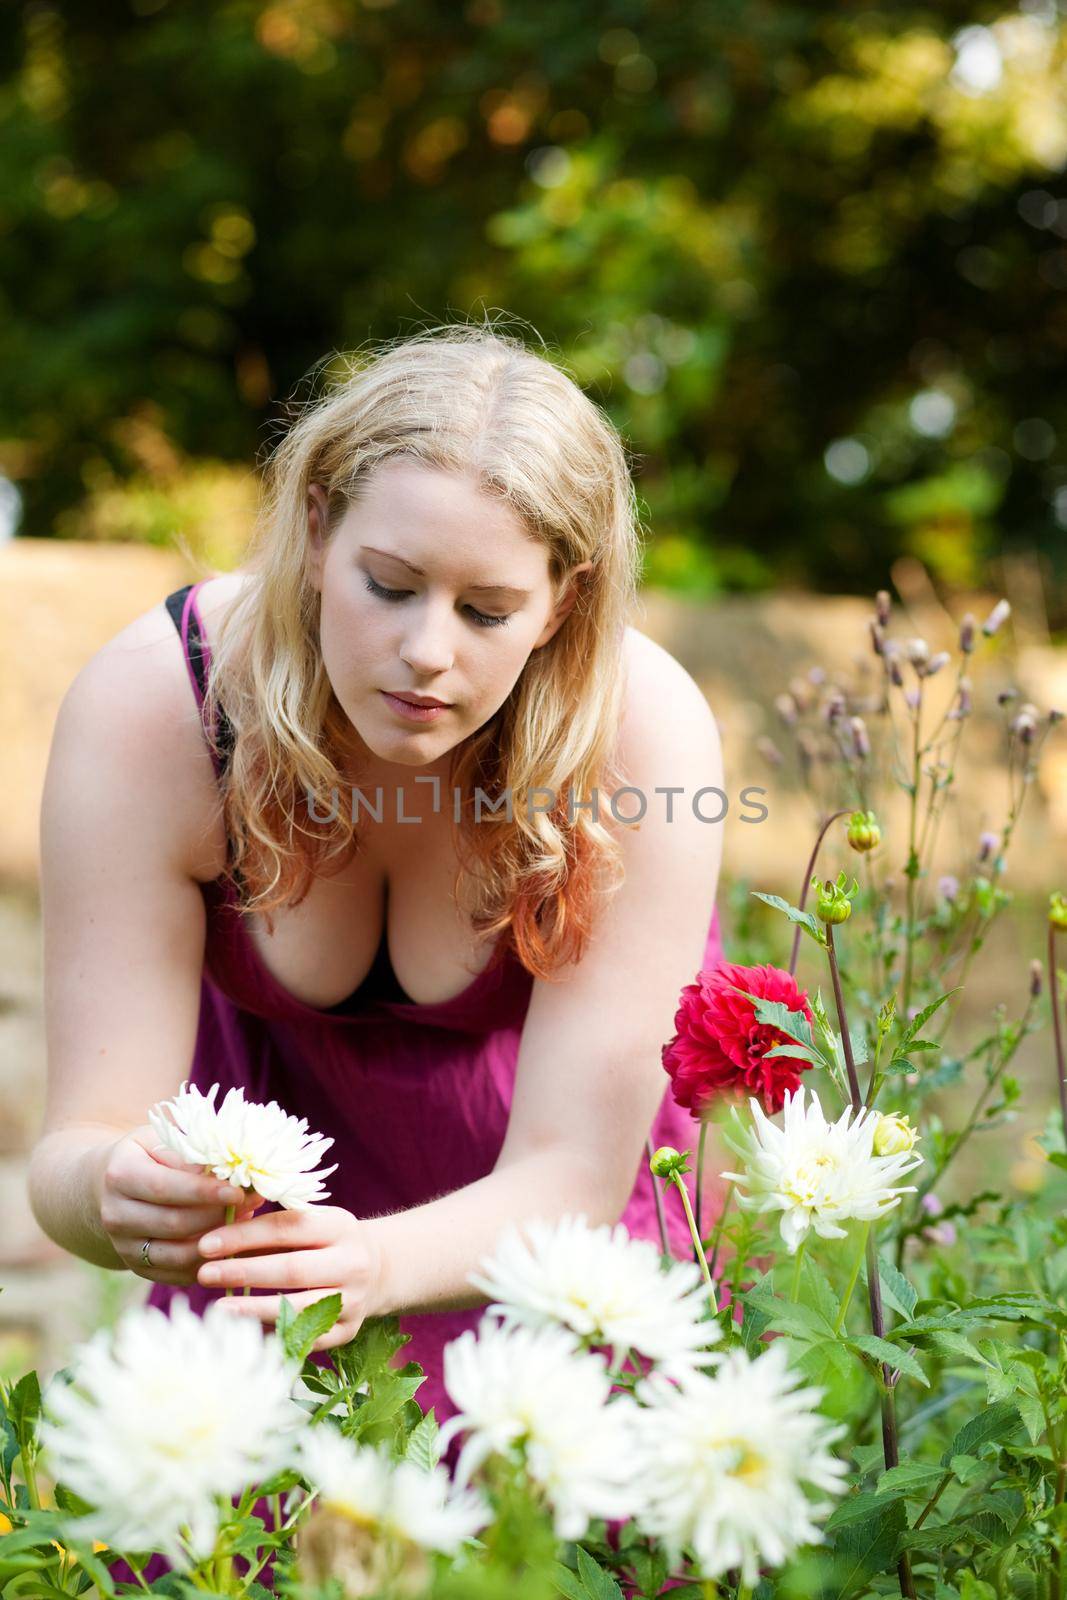 Woman working in the garden with flowers by Kzenon